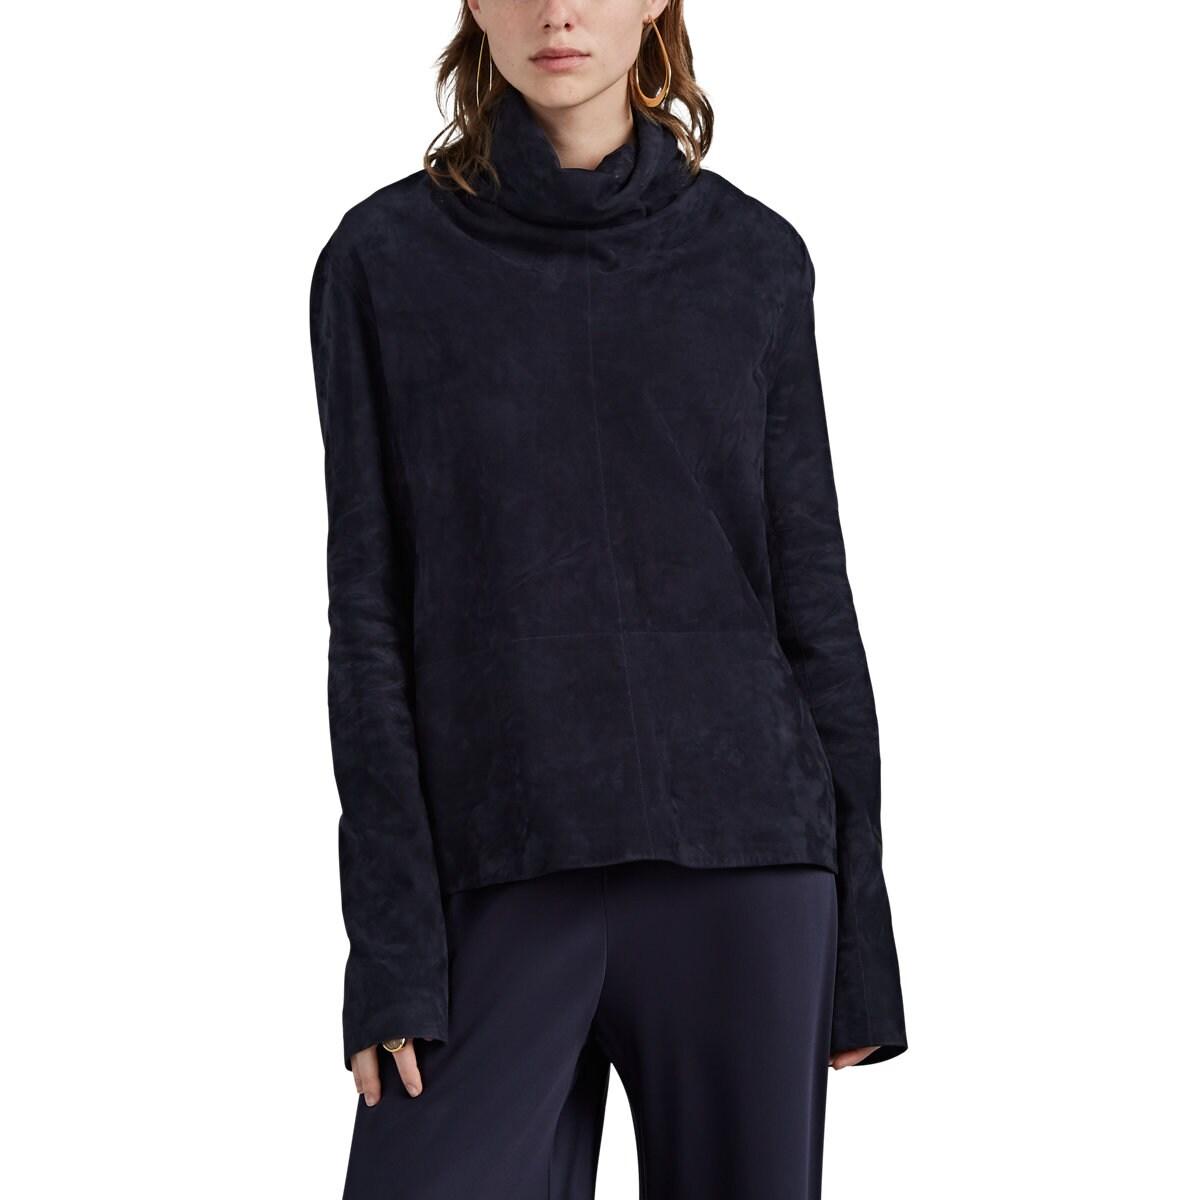 The Row Bora Suede Turtleneck Top in Navy (Blue) - Lyst